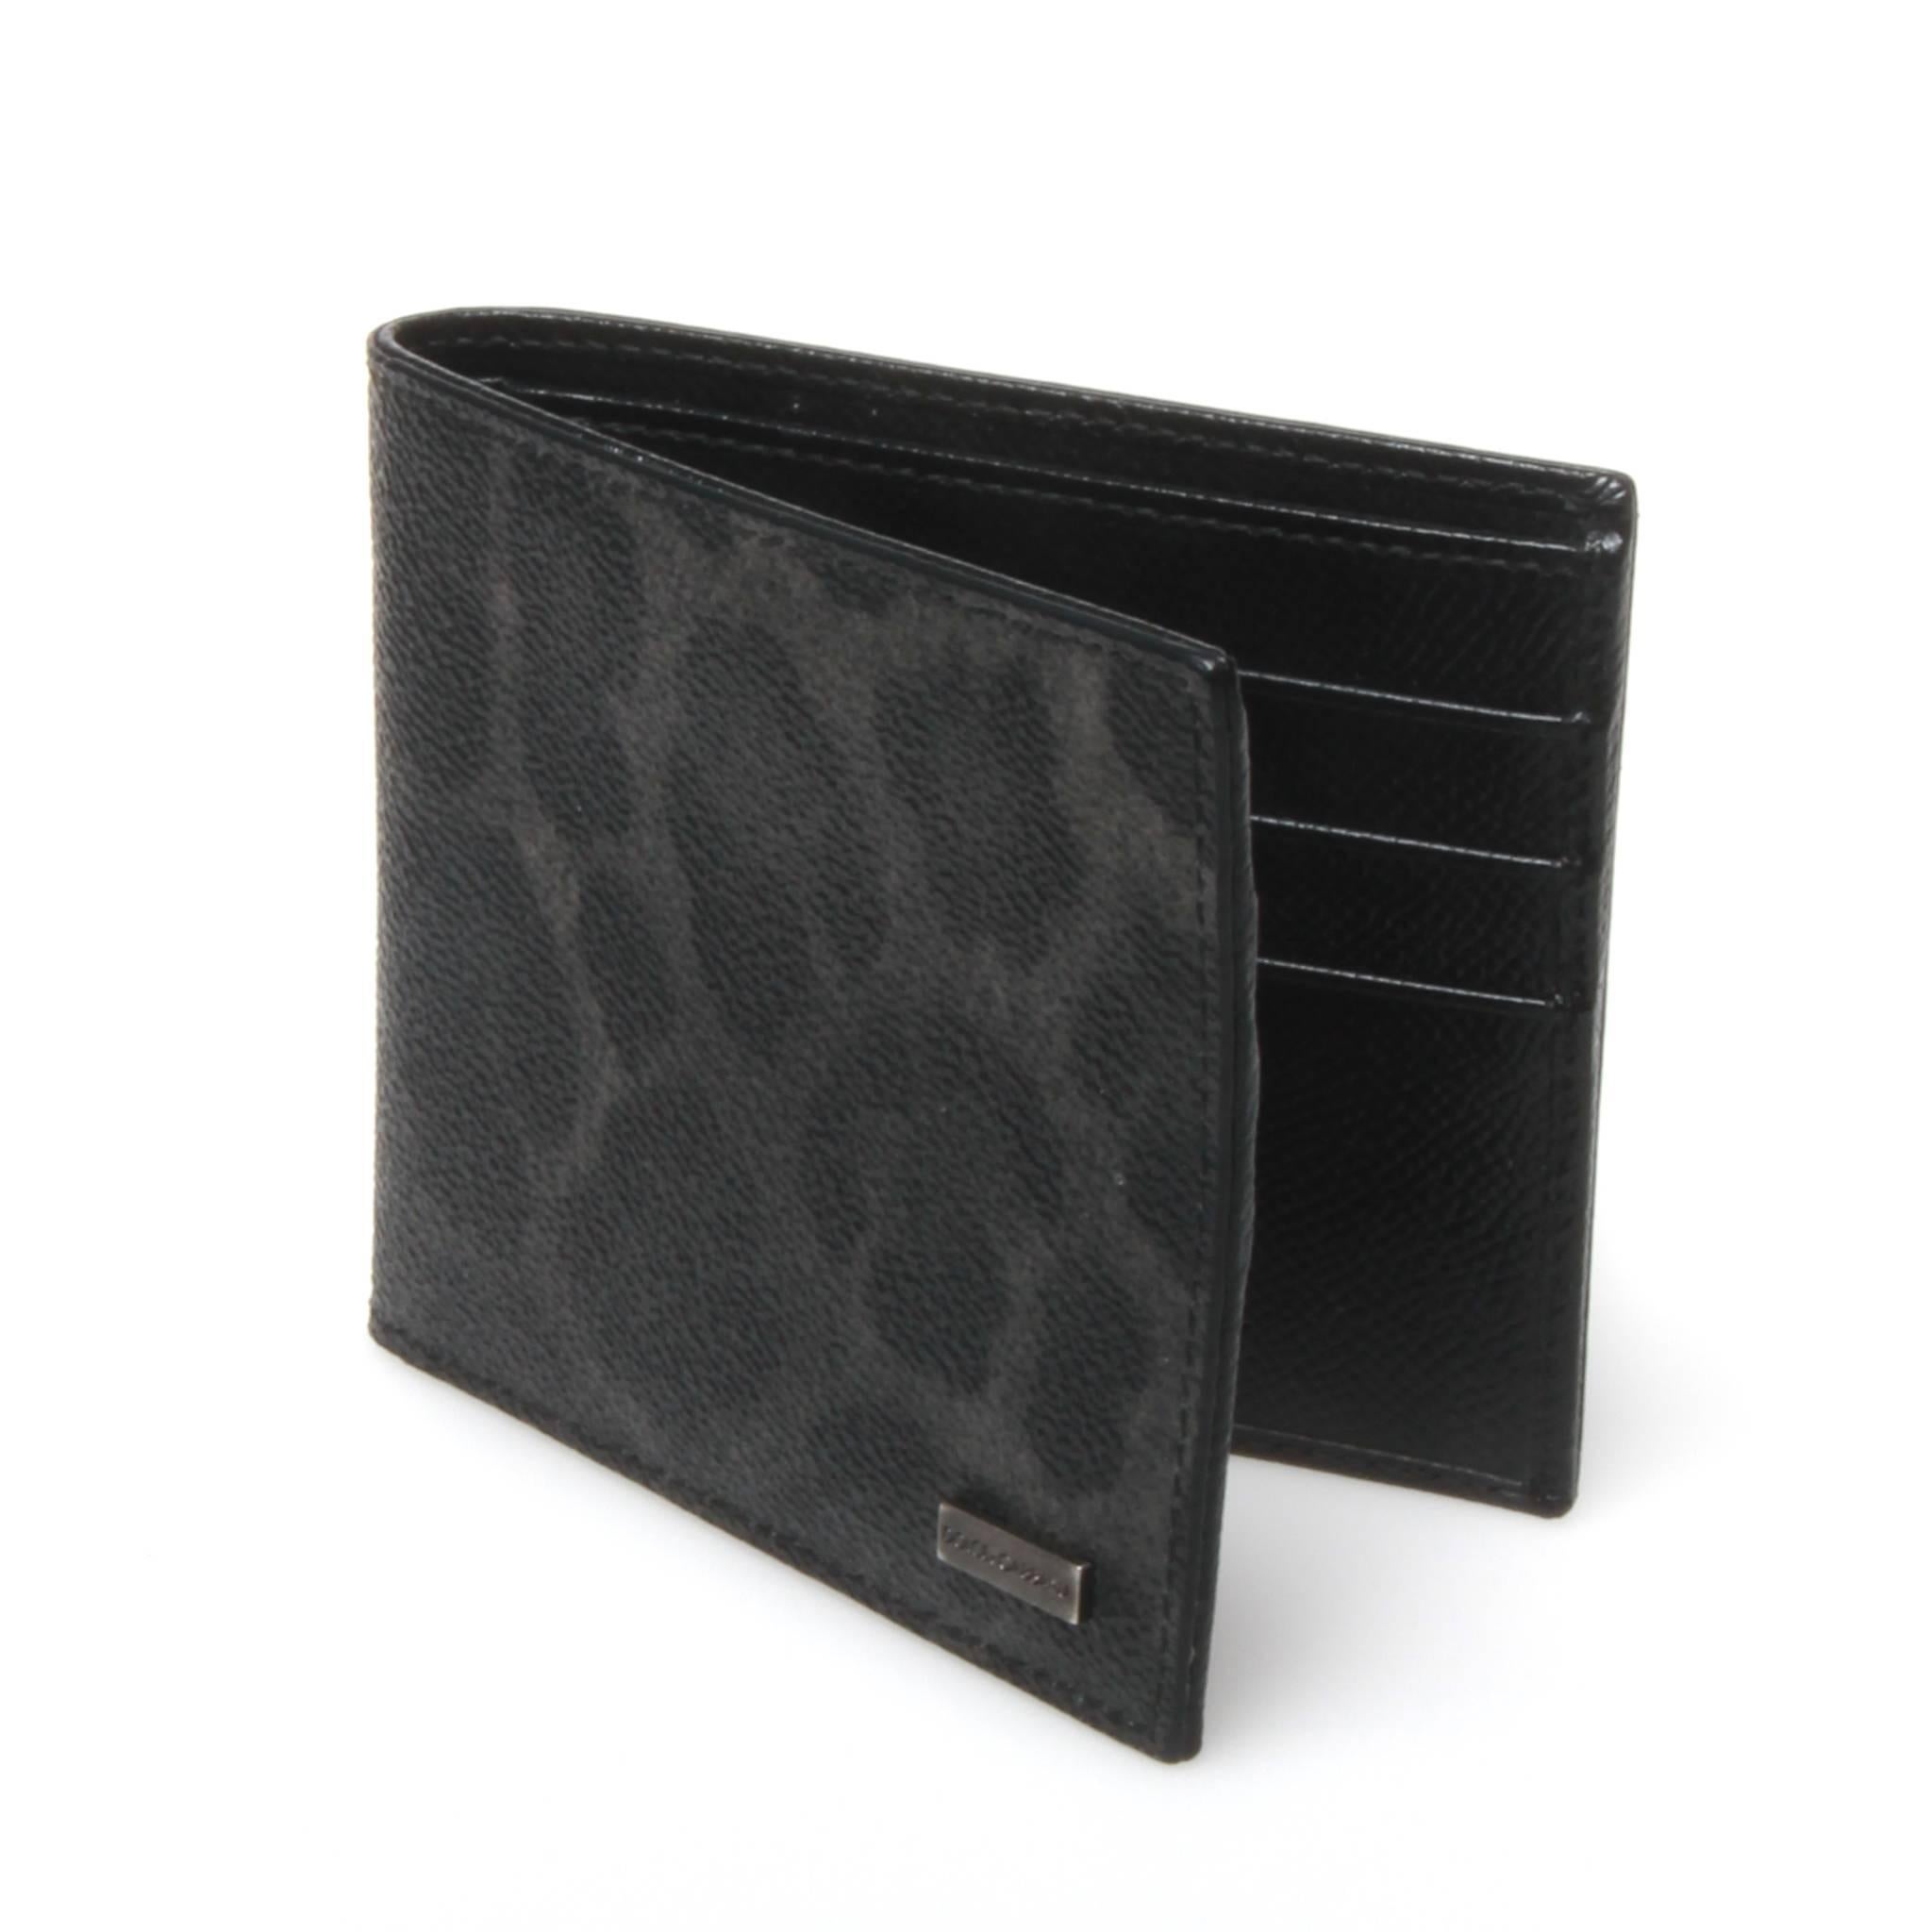 Dolce and Gabbana bi-fold dauphine calf leather wallet featuring a leopard print design in dark tones. Plain black interior features 6 card slots and sleeve for notes and receipts. Aged silver-tone metal brand plaque to front side. 